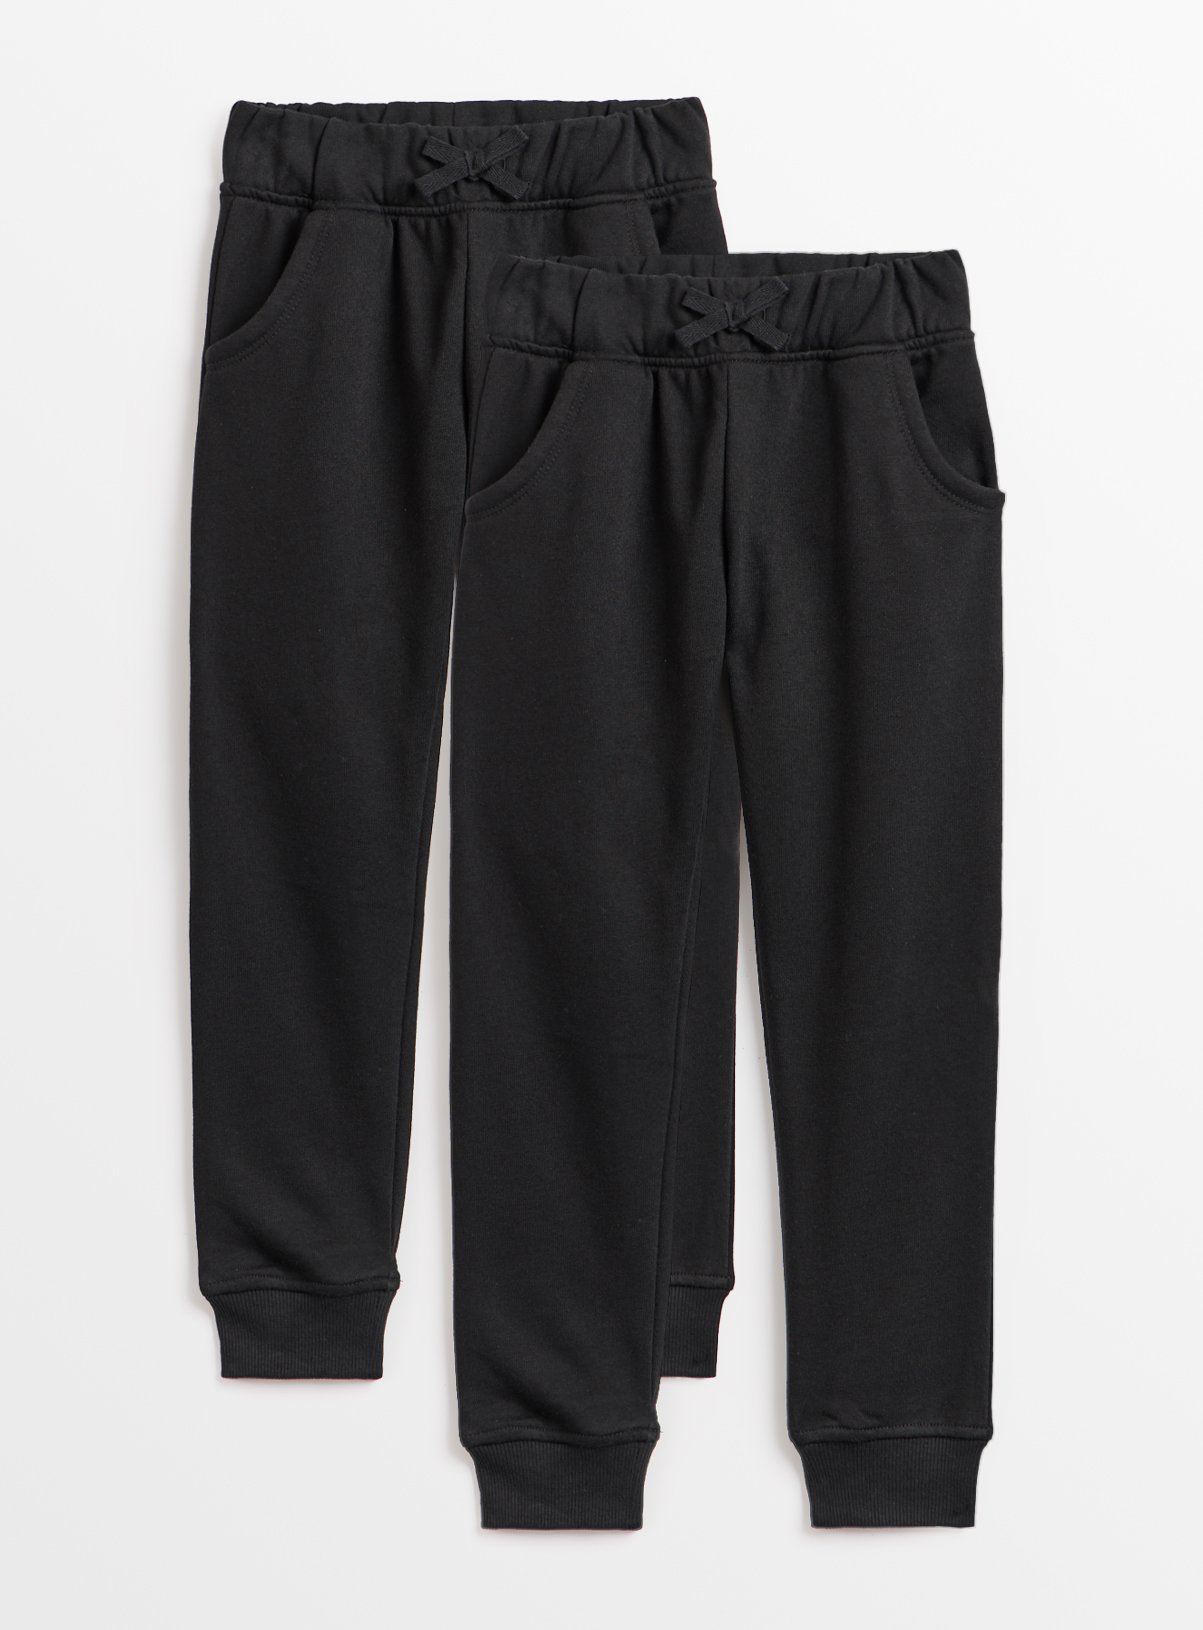 Black Joggers 2 Pack Review